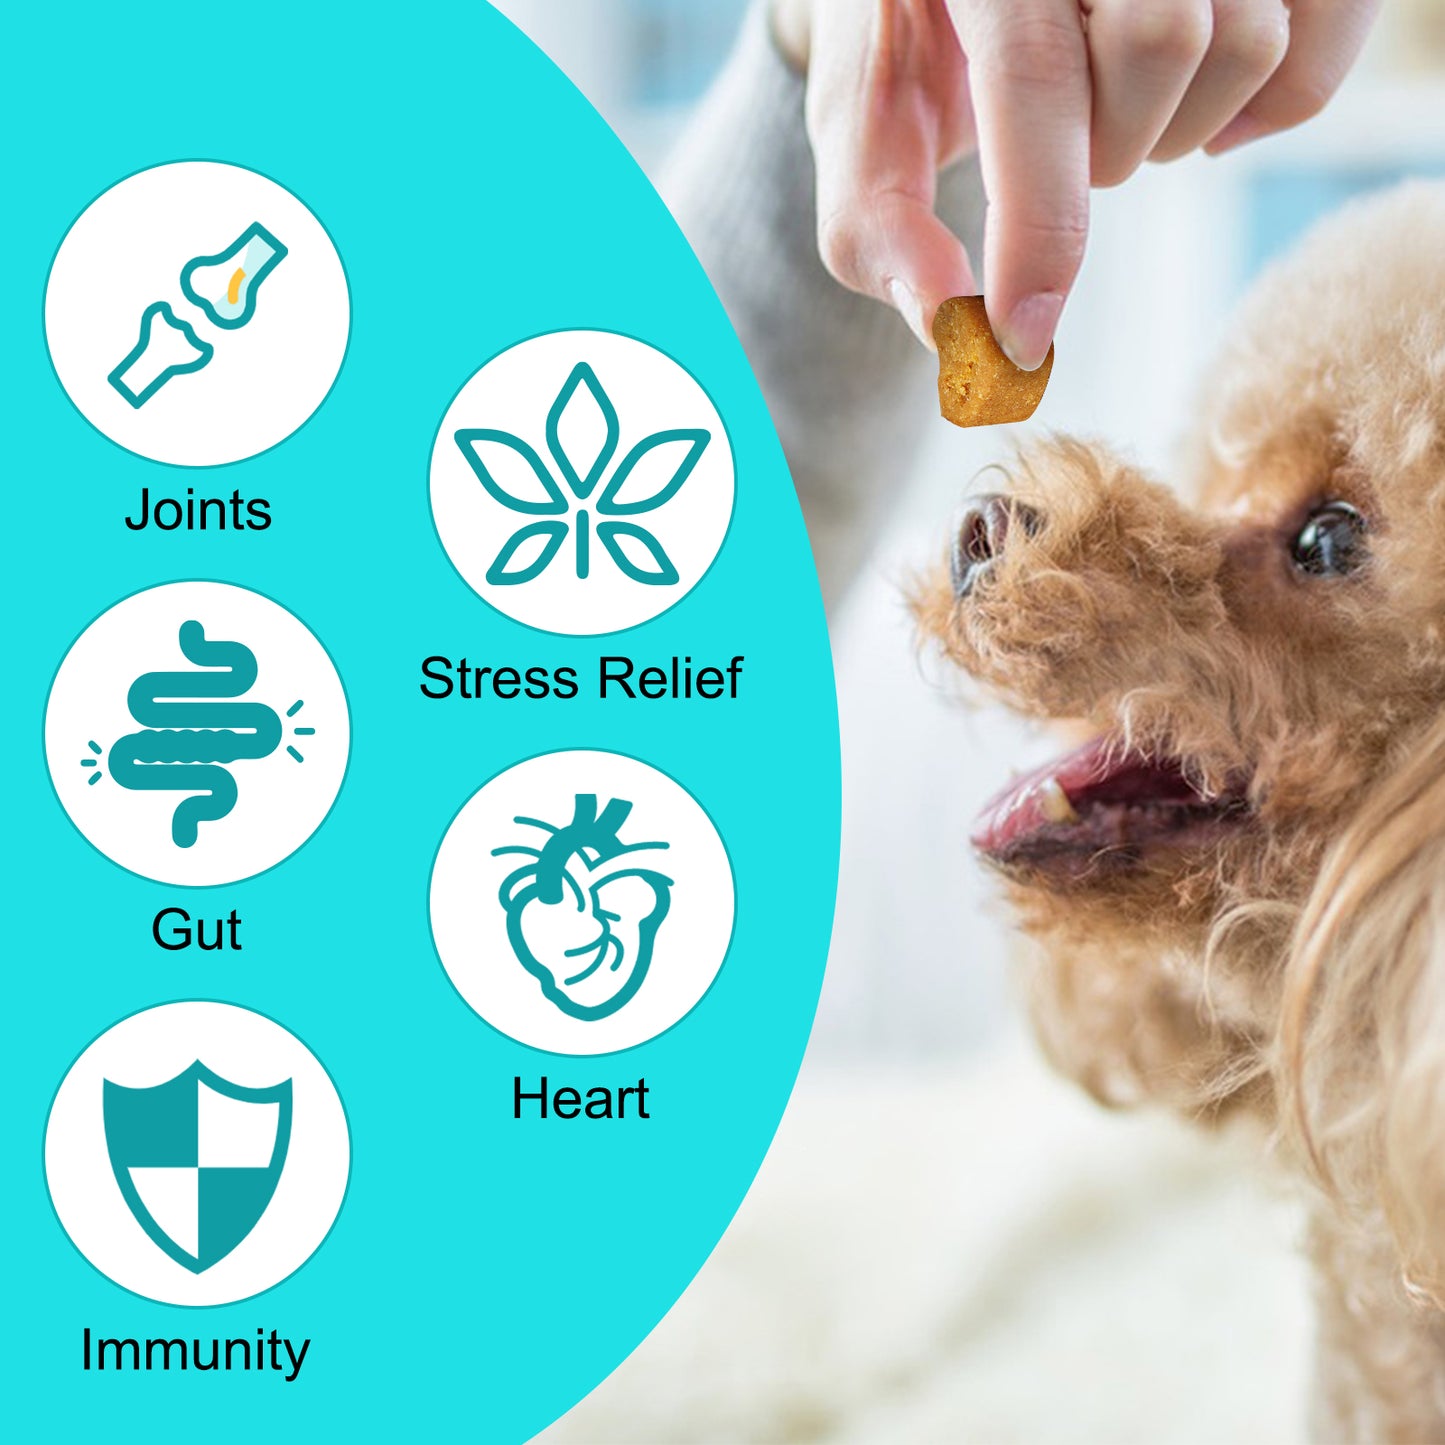 Calming Chews for Dogs